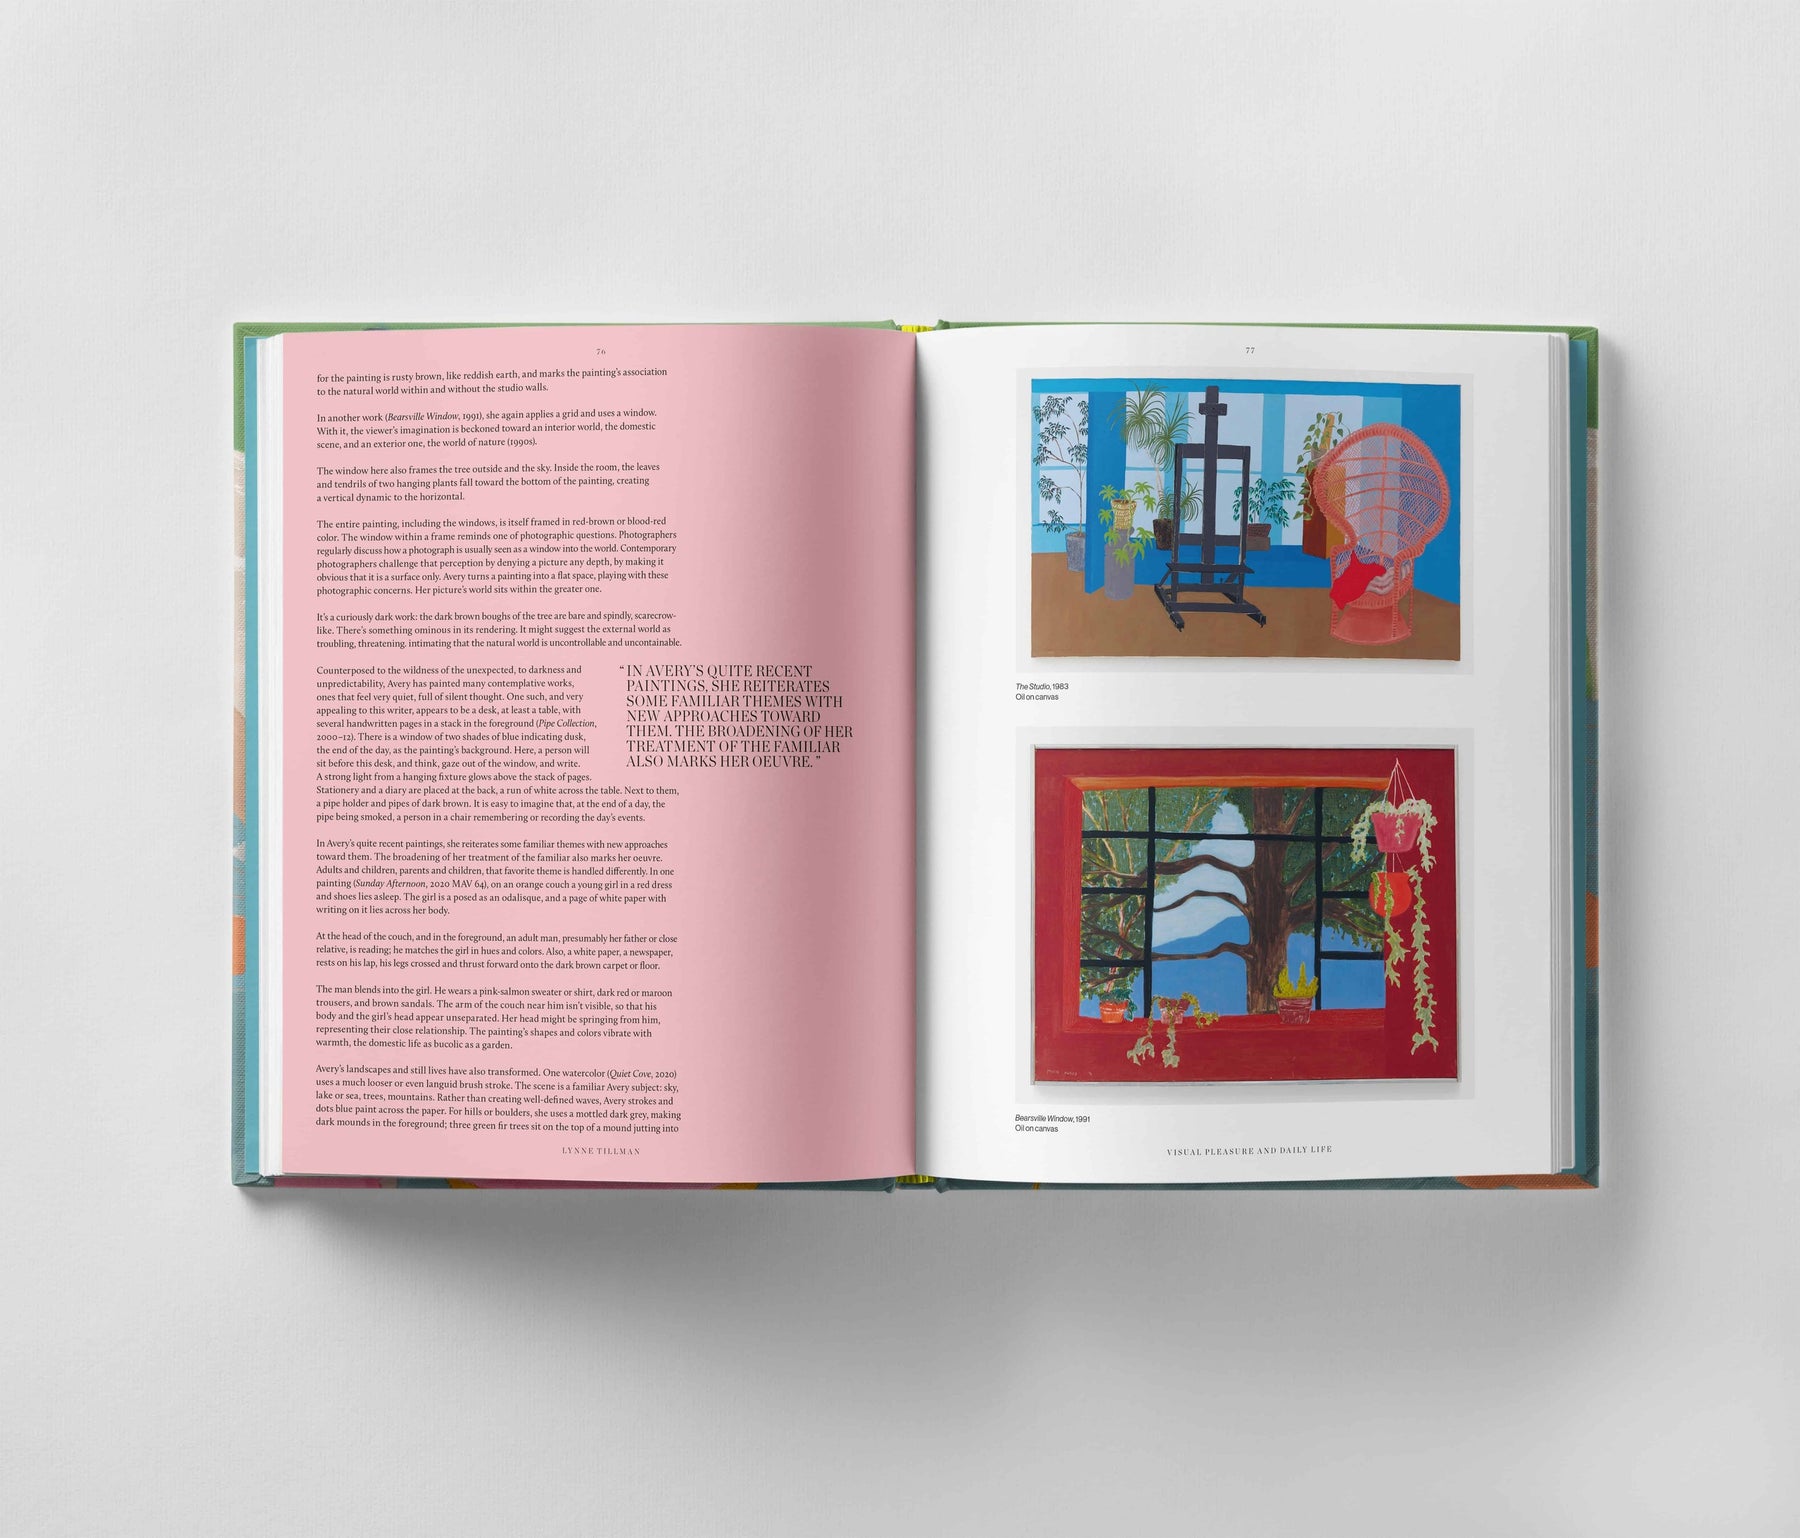 Open March Avery: A Life in Color by Black Dog Online showing text on the left page and two colorful oil paintings of windows on the right page. Left page has a pink section with a small paragraph in a bold font. The right painting, reminiscent of March Avery's style, contains plants that add emotional depth to the scene.